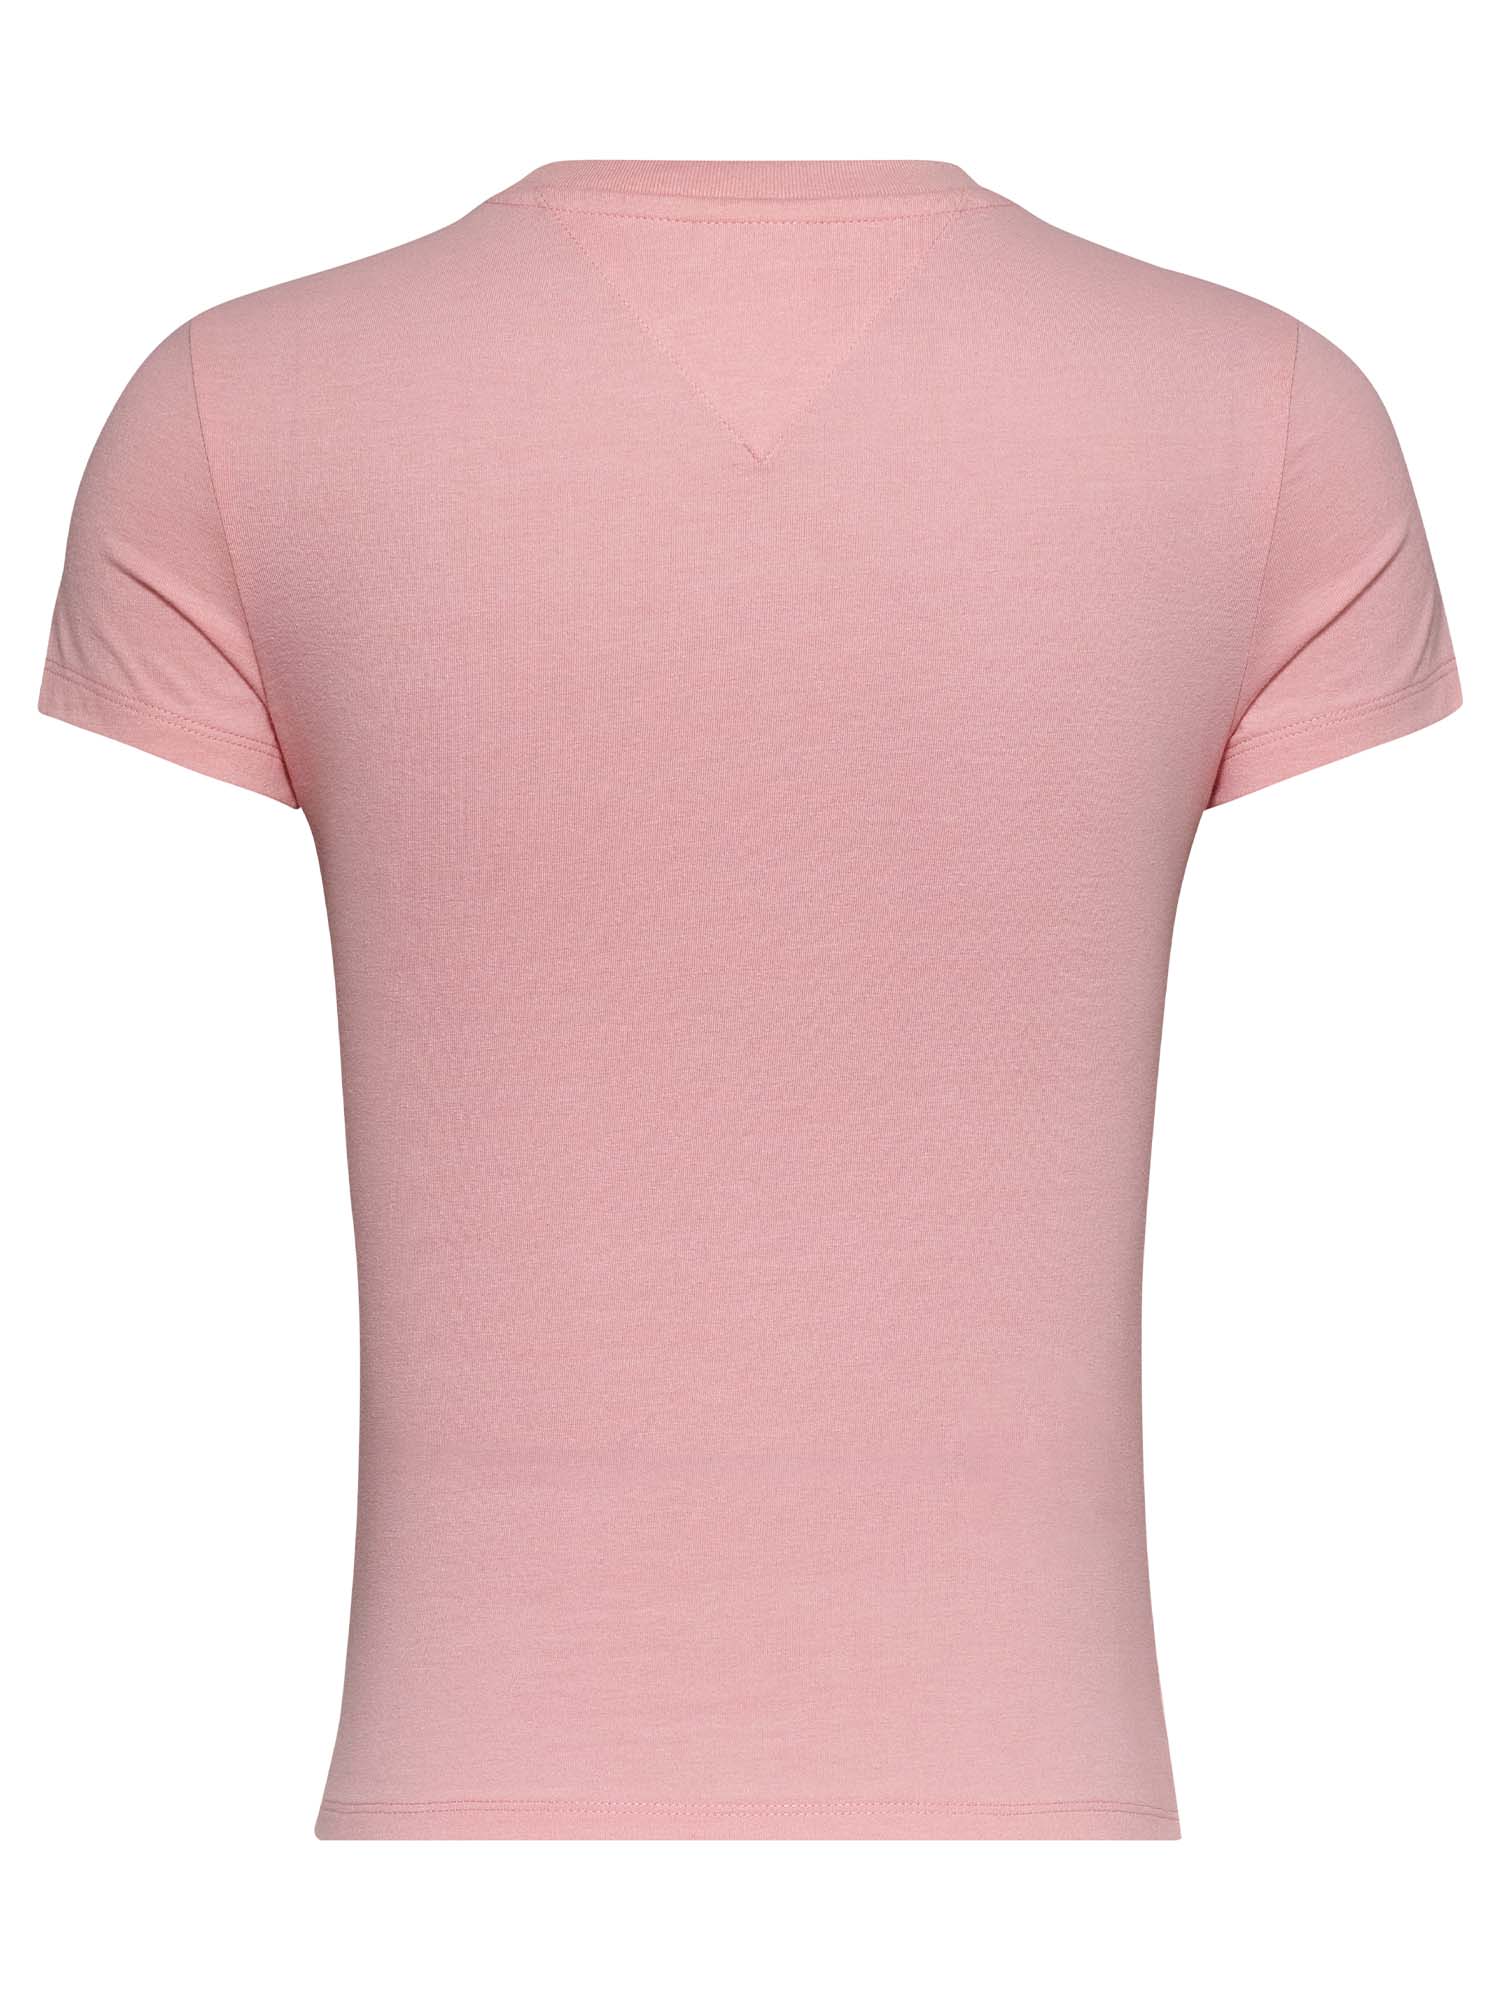 T-SHIRT SLIM TOMMY JEANS DONNA - ROSA